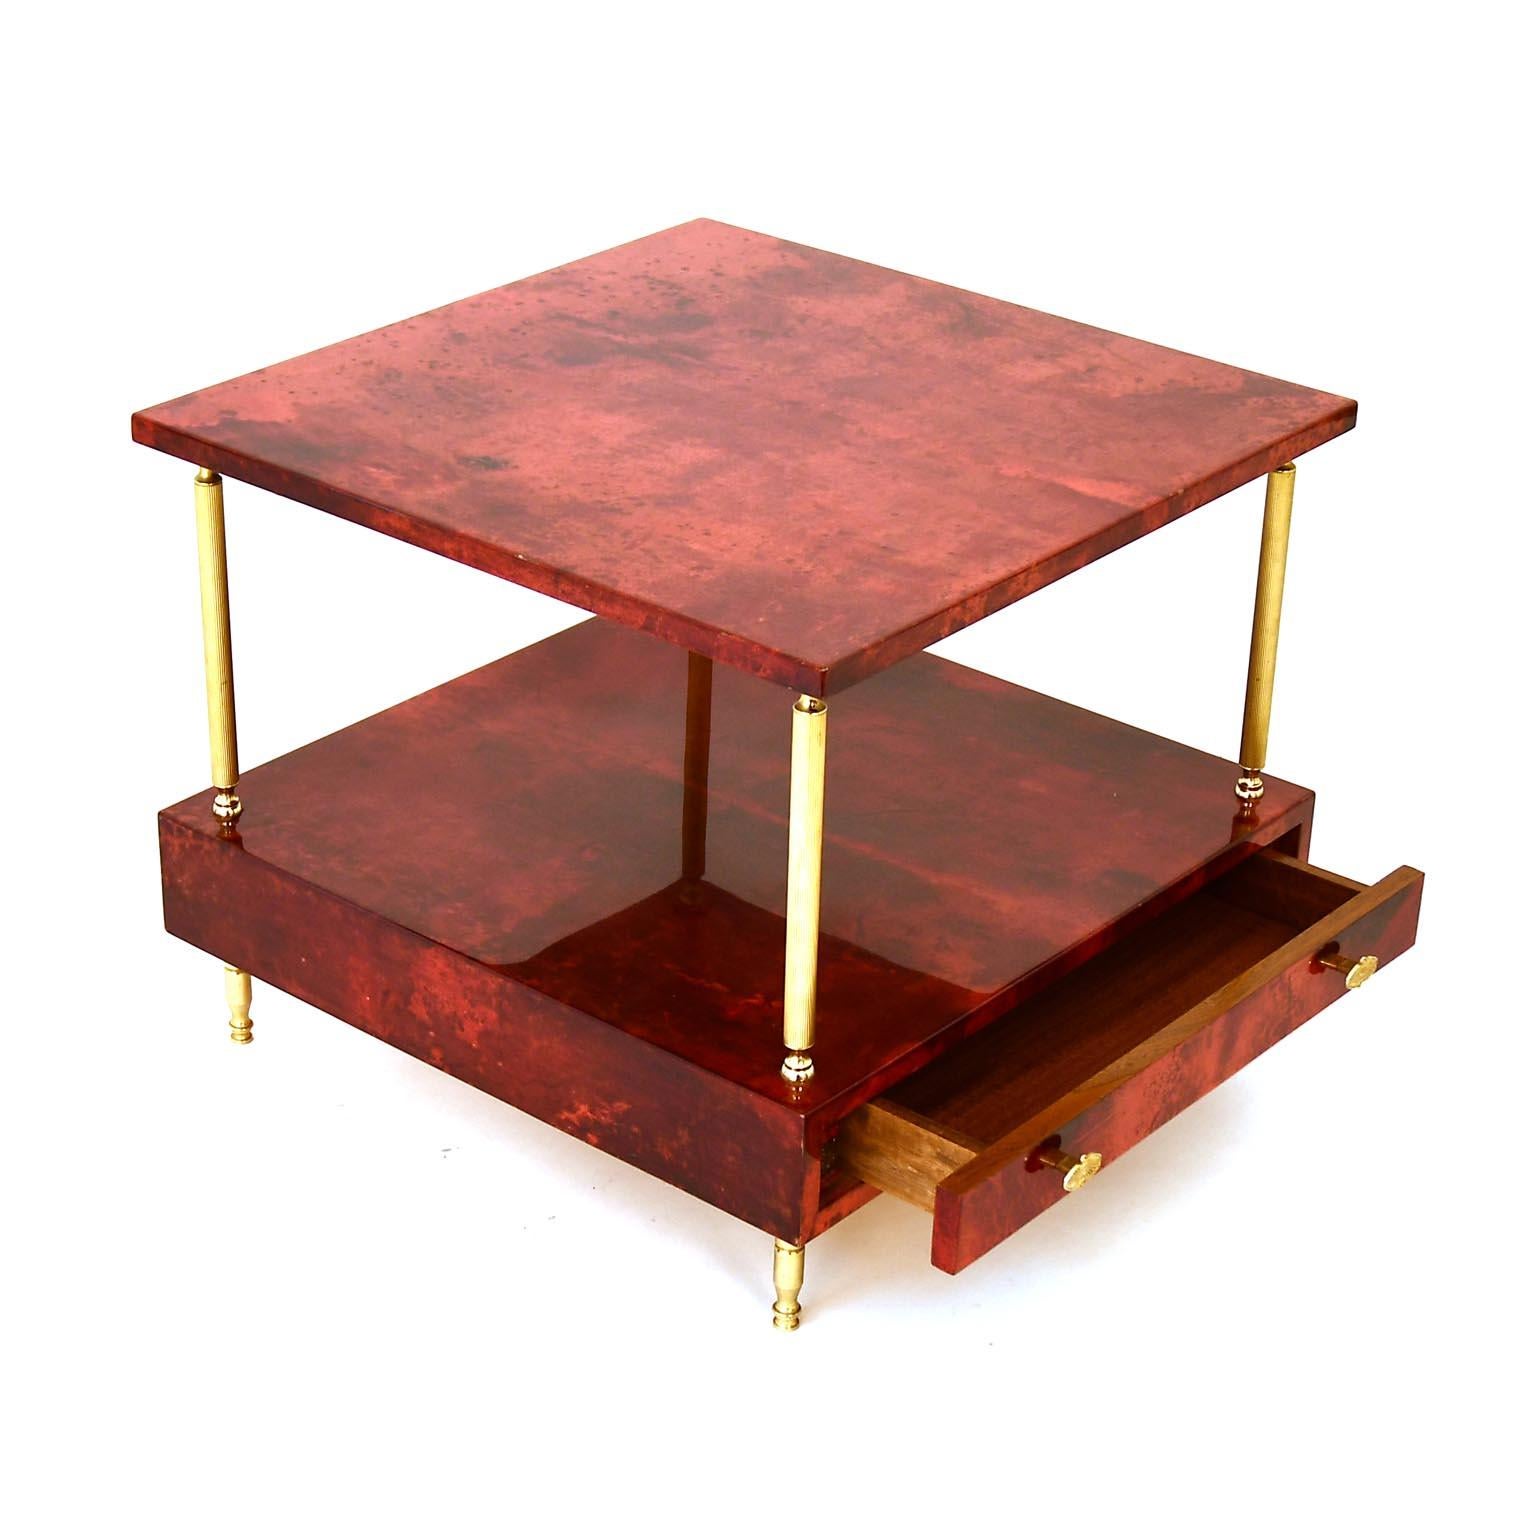 Italian Coffee Table Aldo Tura Red Goatskin, Italy 50's, Brass Mid-Century Signed For Sale